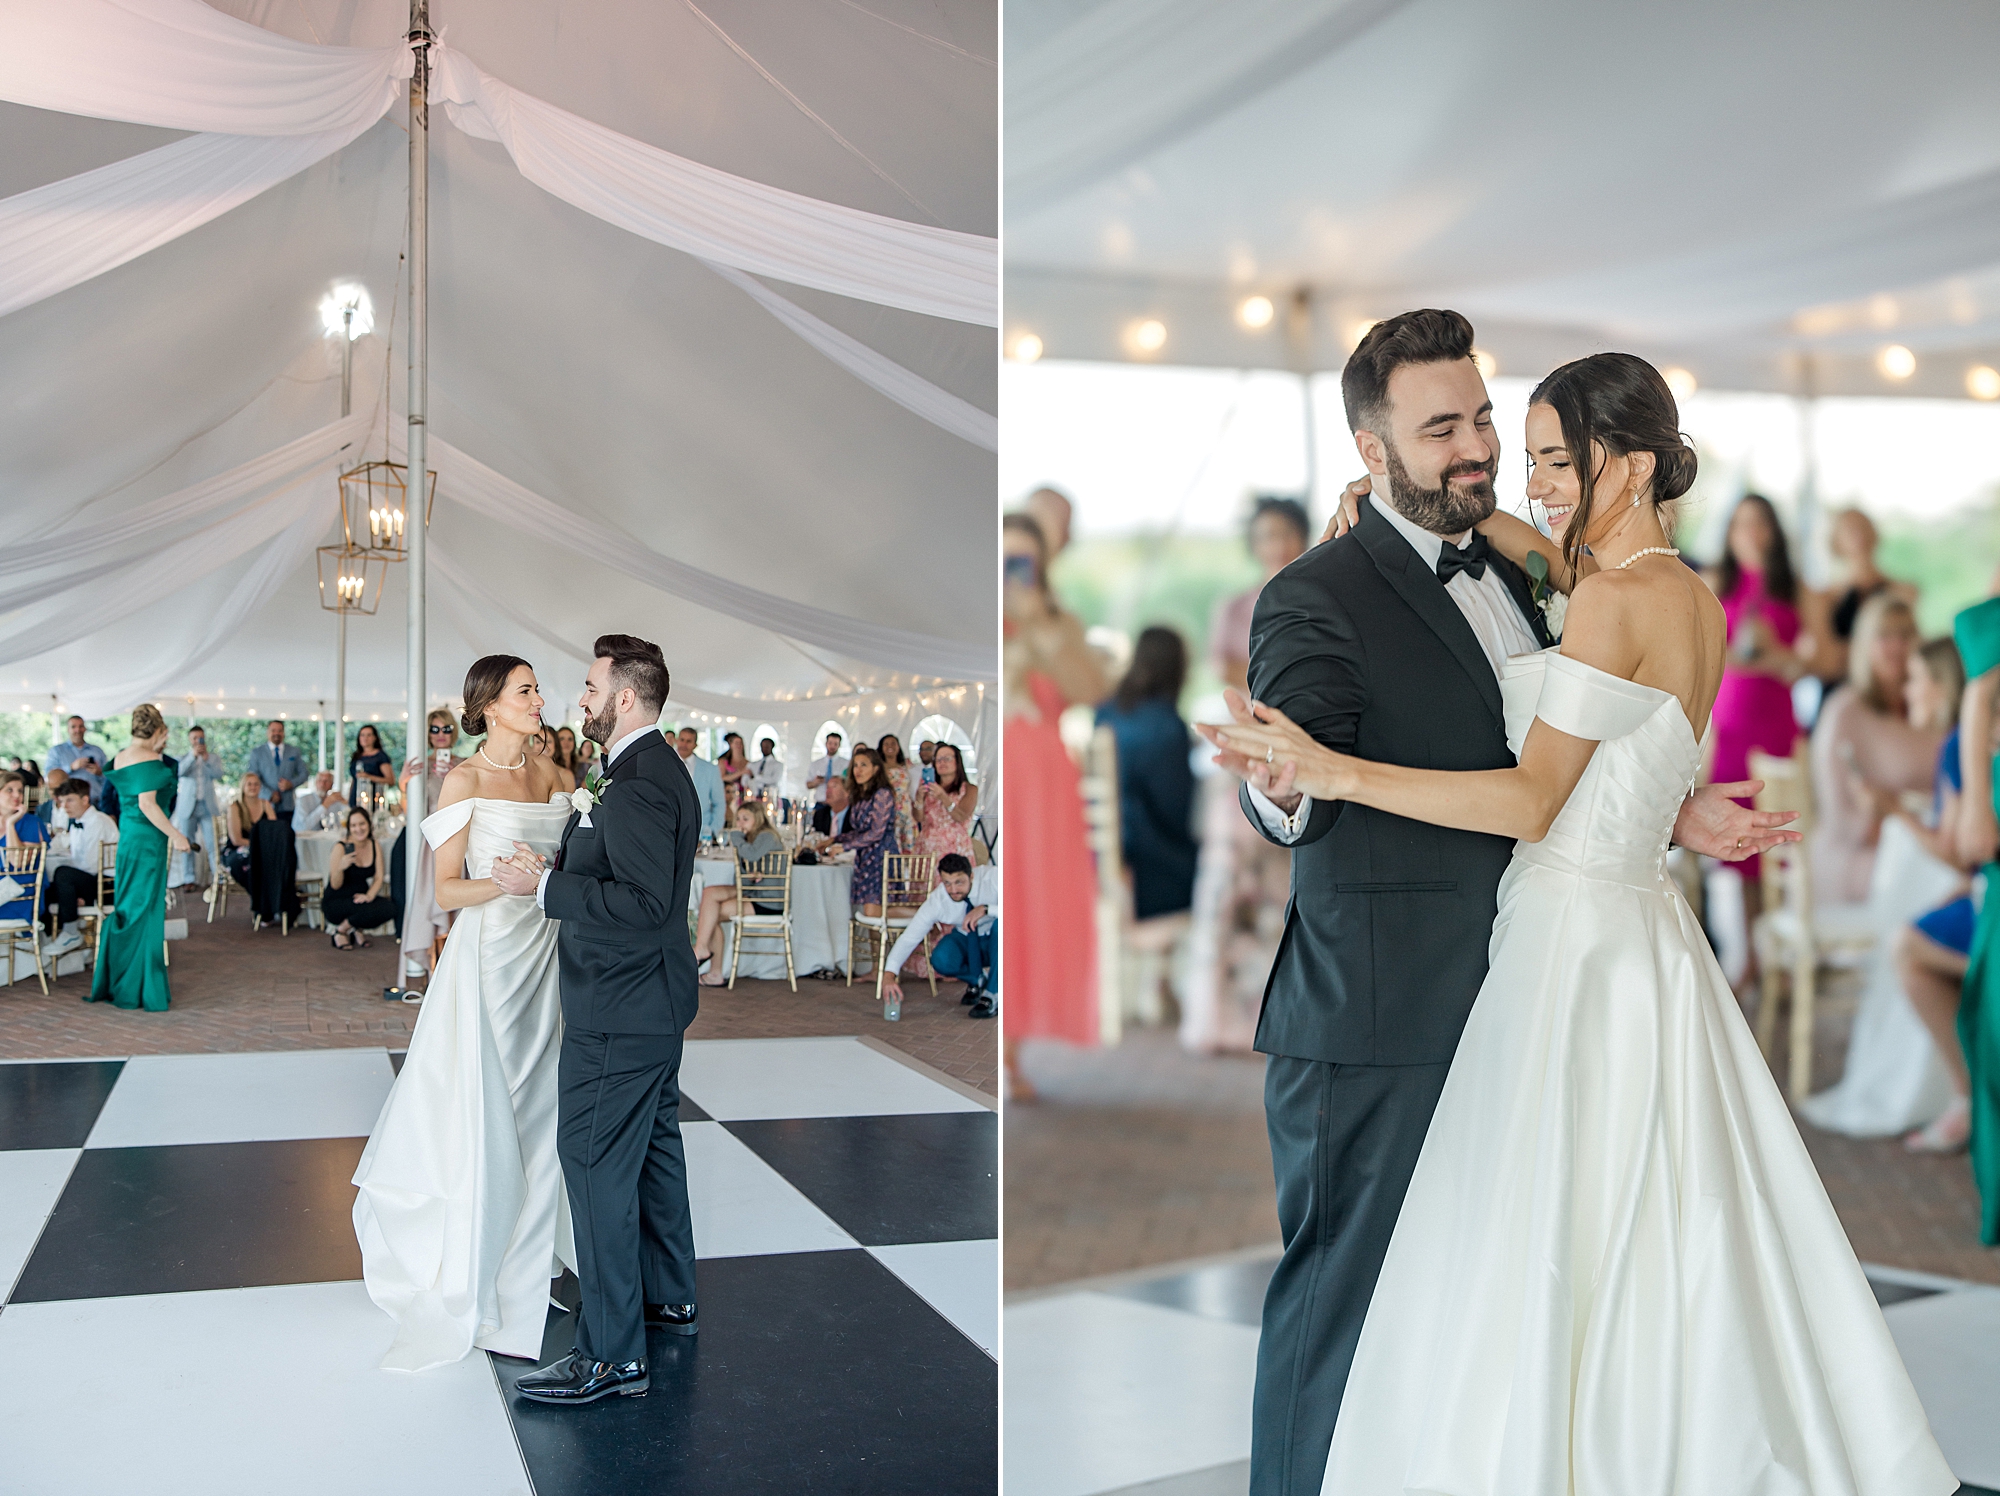 bride and groom share their first dance together